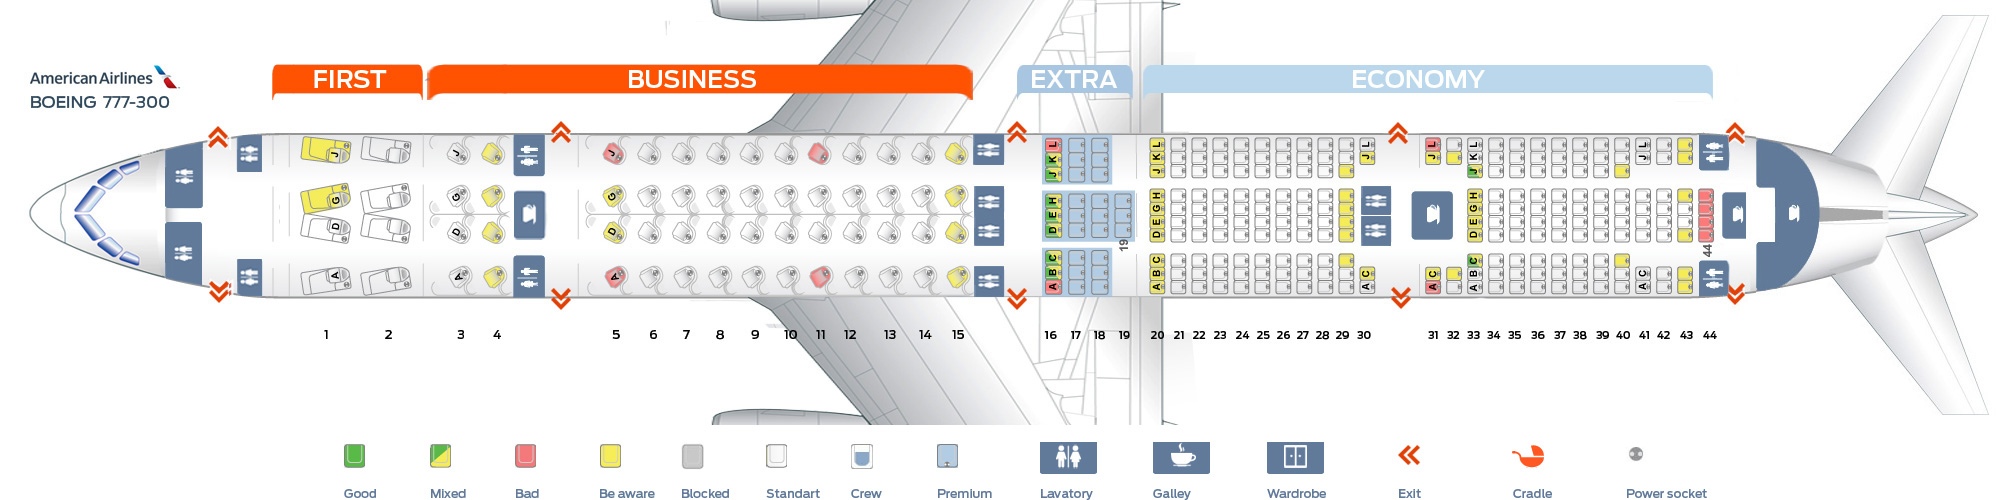 American Airlines Flight Seating Chart